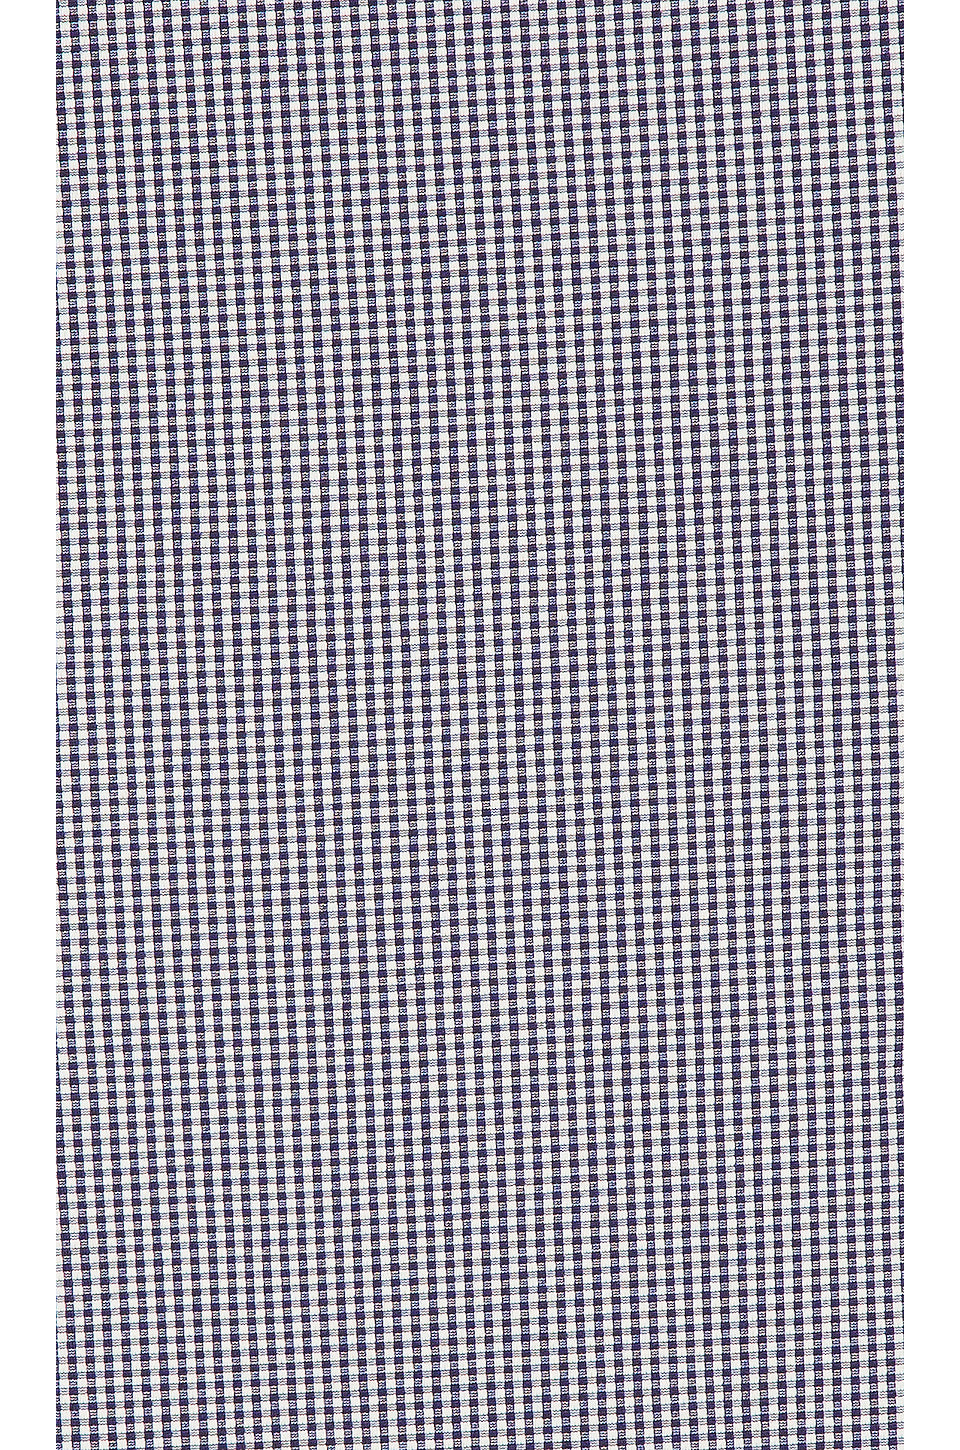 The Cacey Top in NAVY GINGHAM